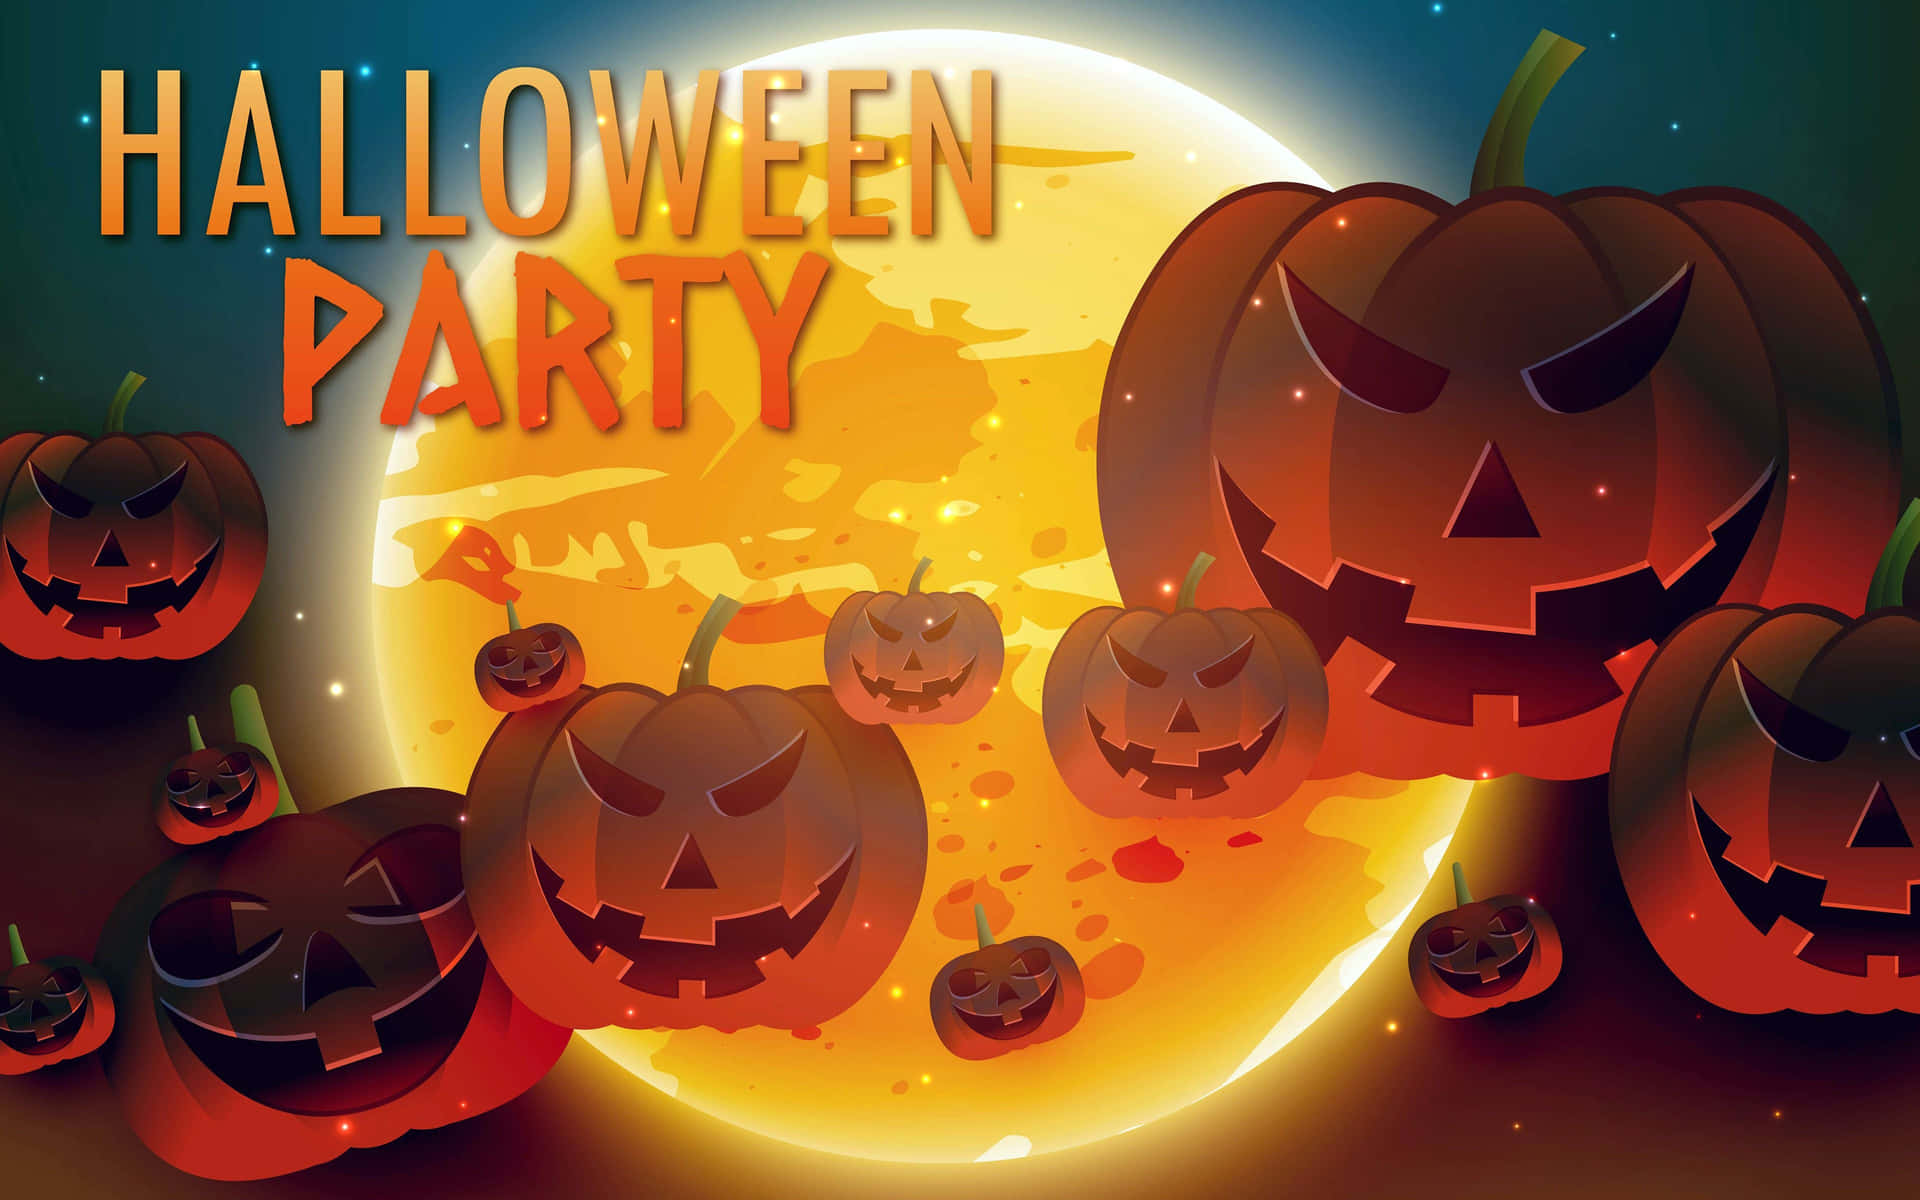 Halloween Party With Pumpkins And A Moon